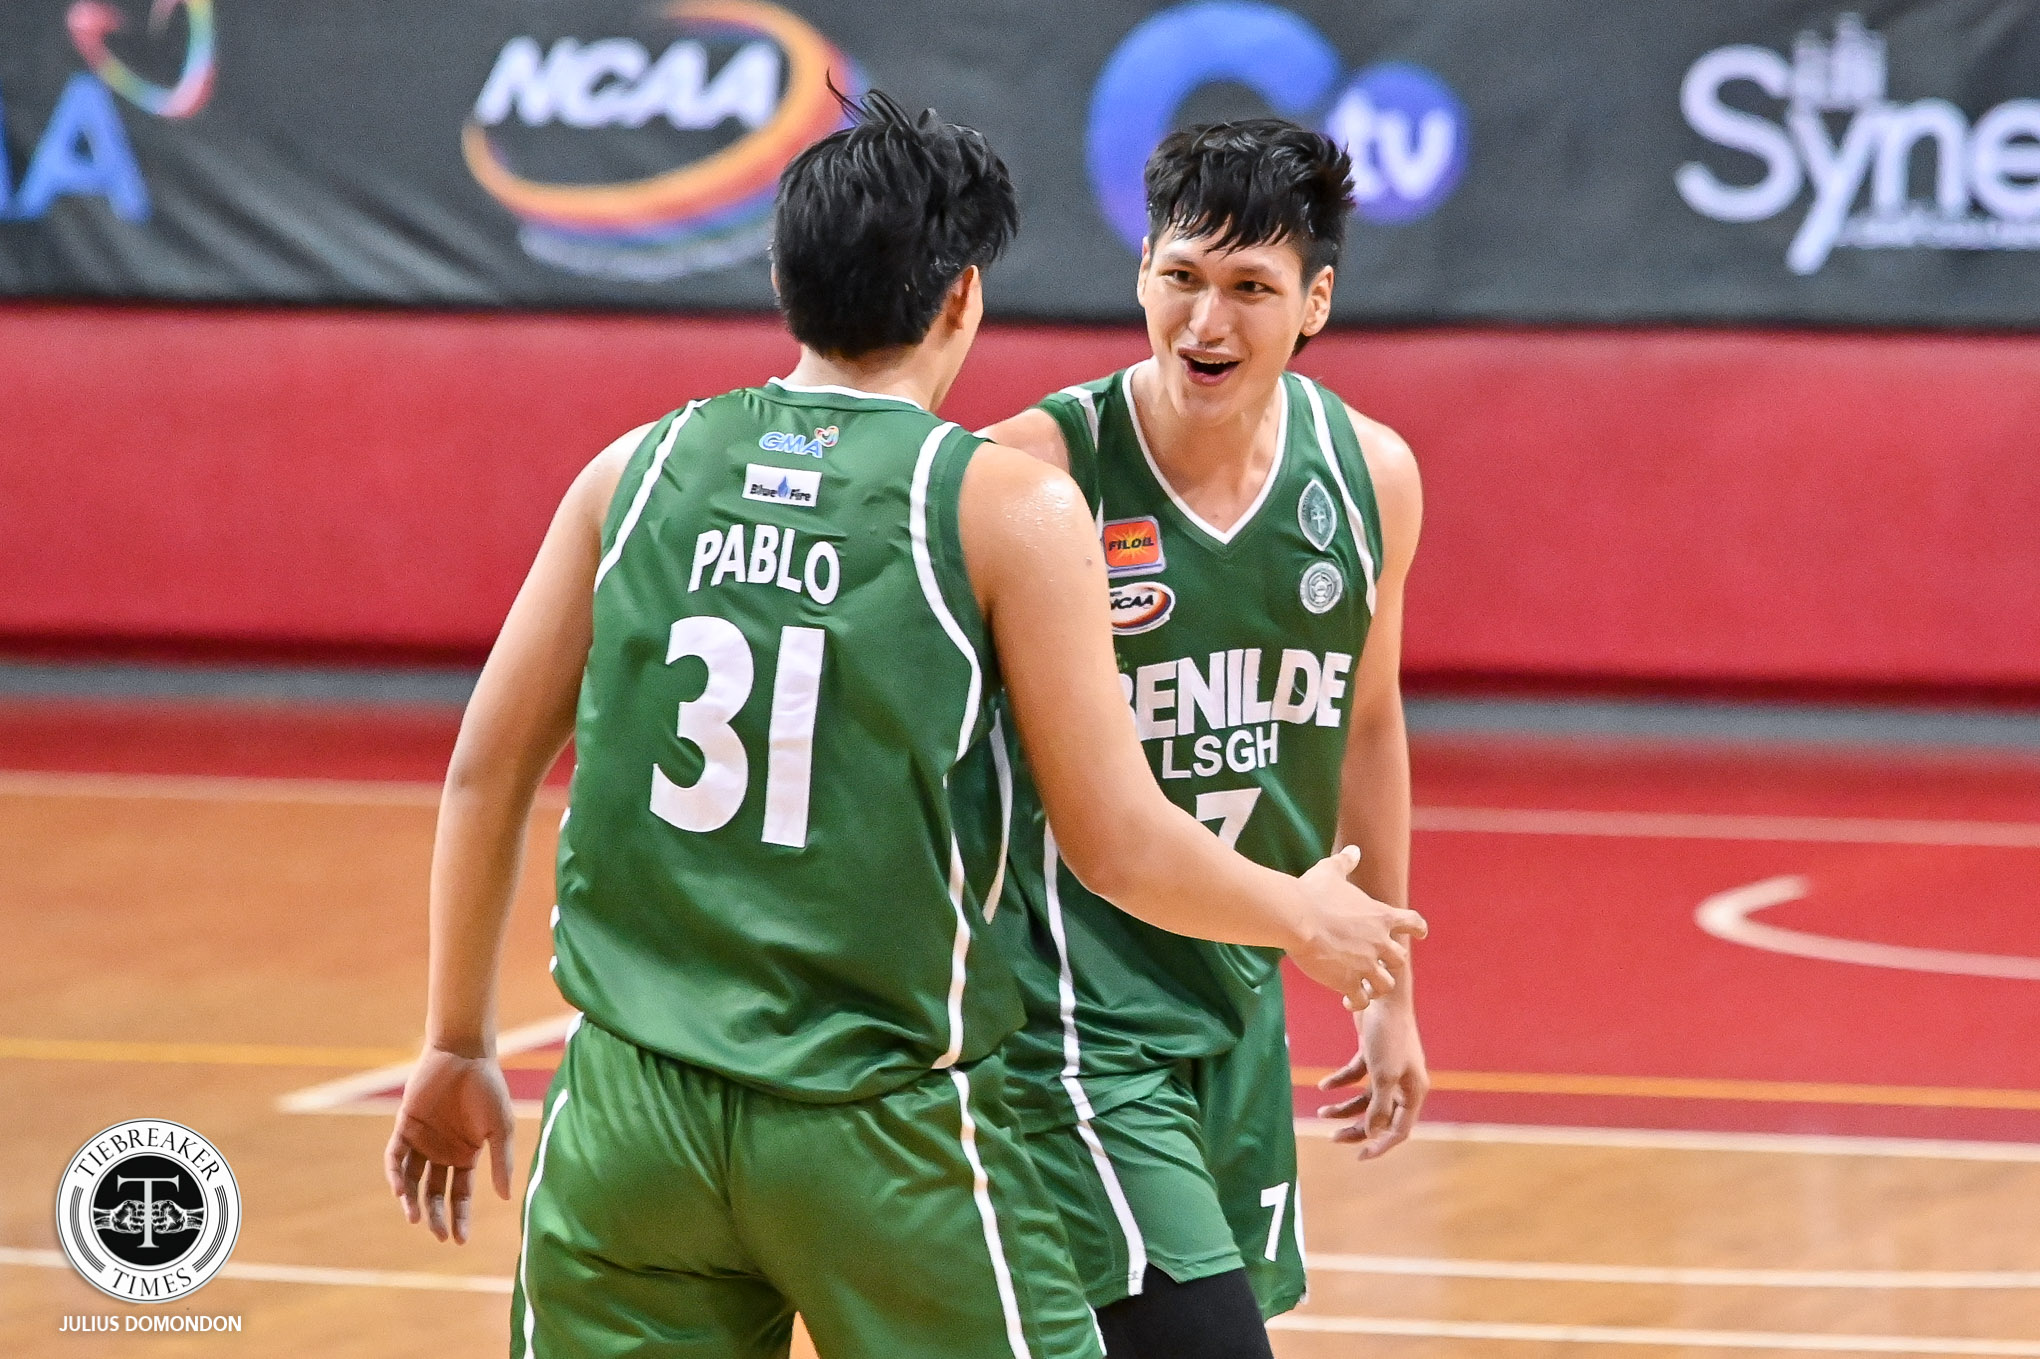 NCAA-Season-98-LSGH-vs-San-Beda-Seven-Gagate-1 Luis Pablo commits to UP as Seven Gagate, Joshua Coronel ponder joining him Basketball CSB NCAA News UAAP UP  - philippine sports news